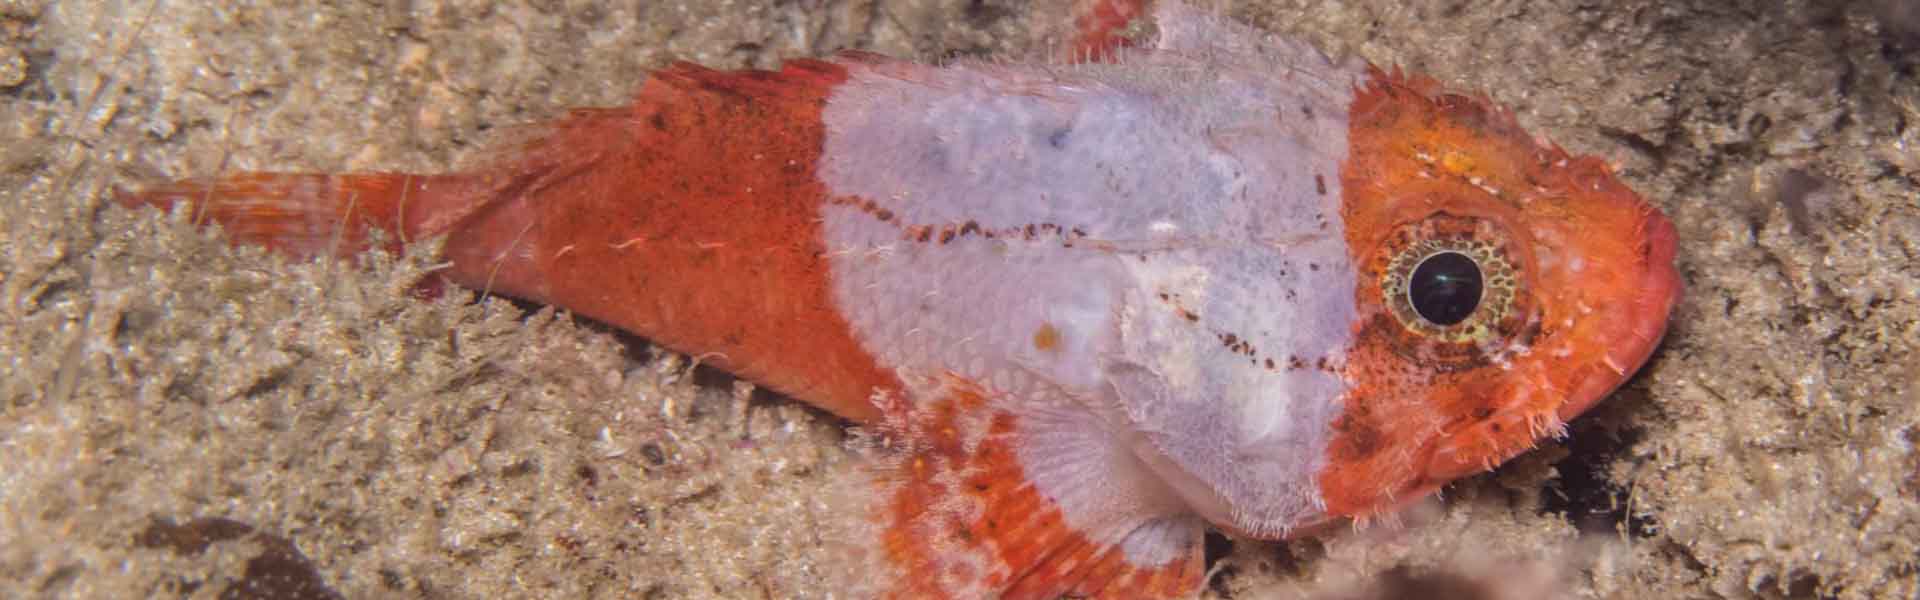 The Lowfin Scorpionfish